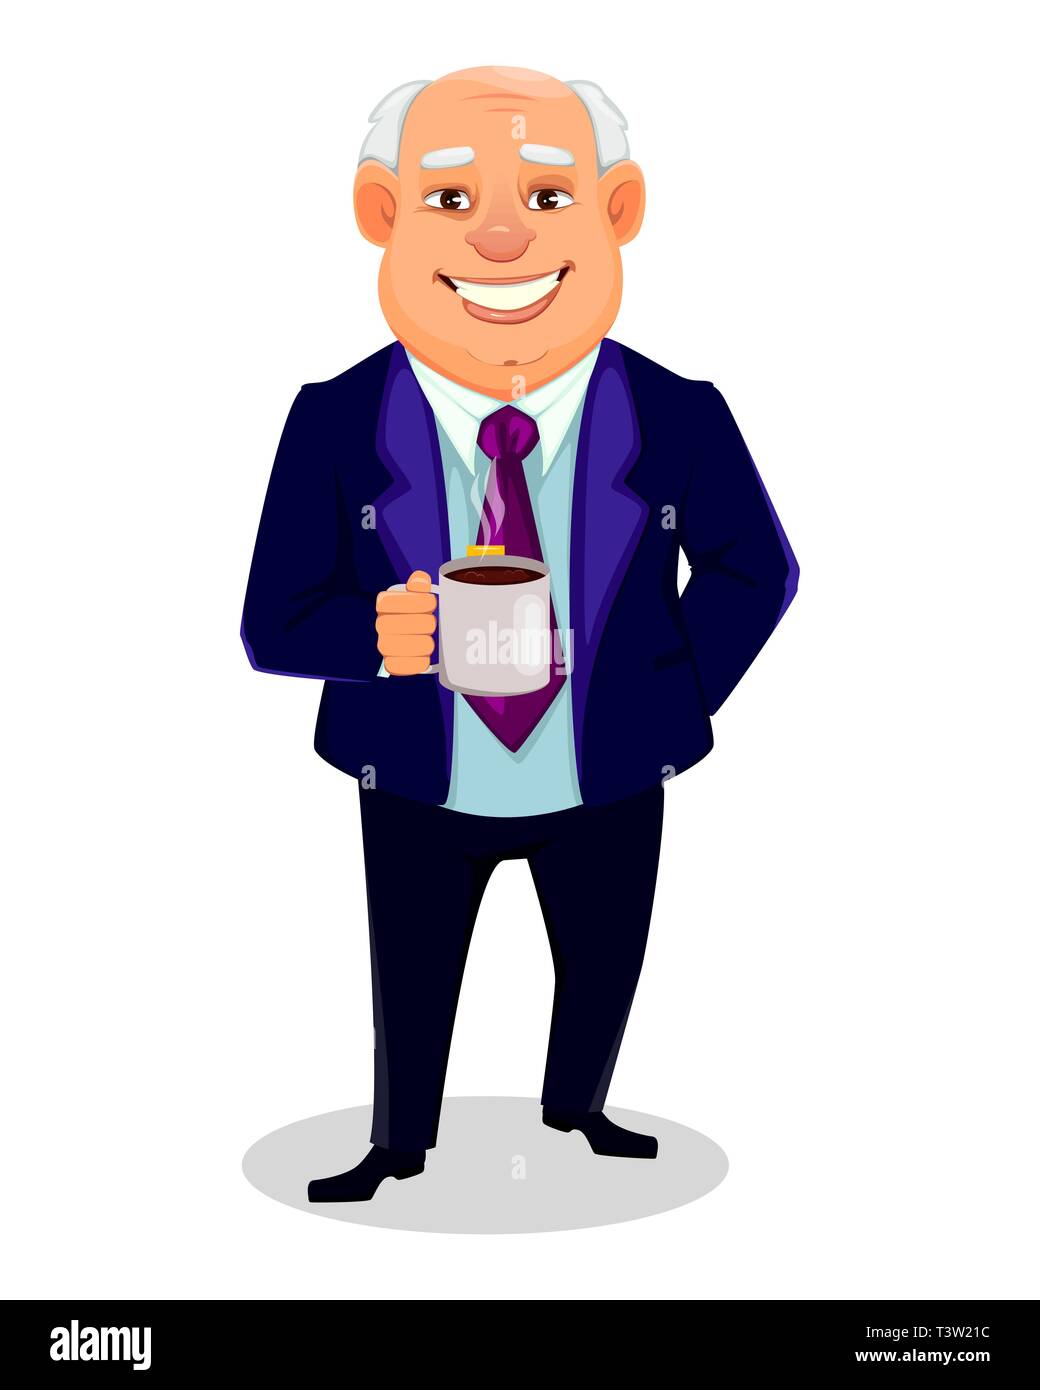 Cheerful fat business man. Businessman cartoon character holds a cup of hot coffee while coffee break. Vector illustration. Stock Vector